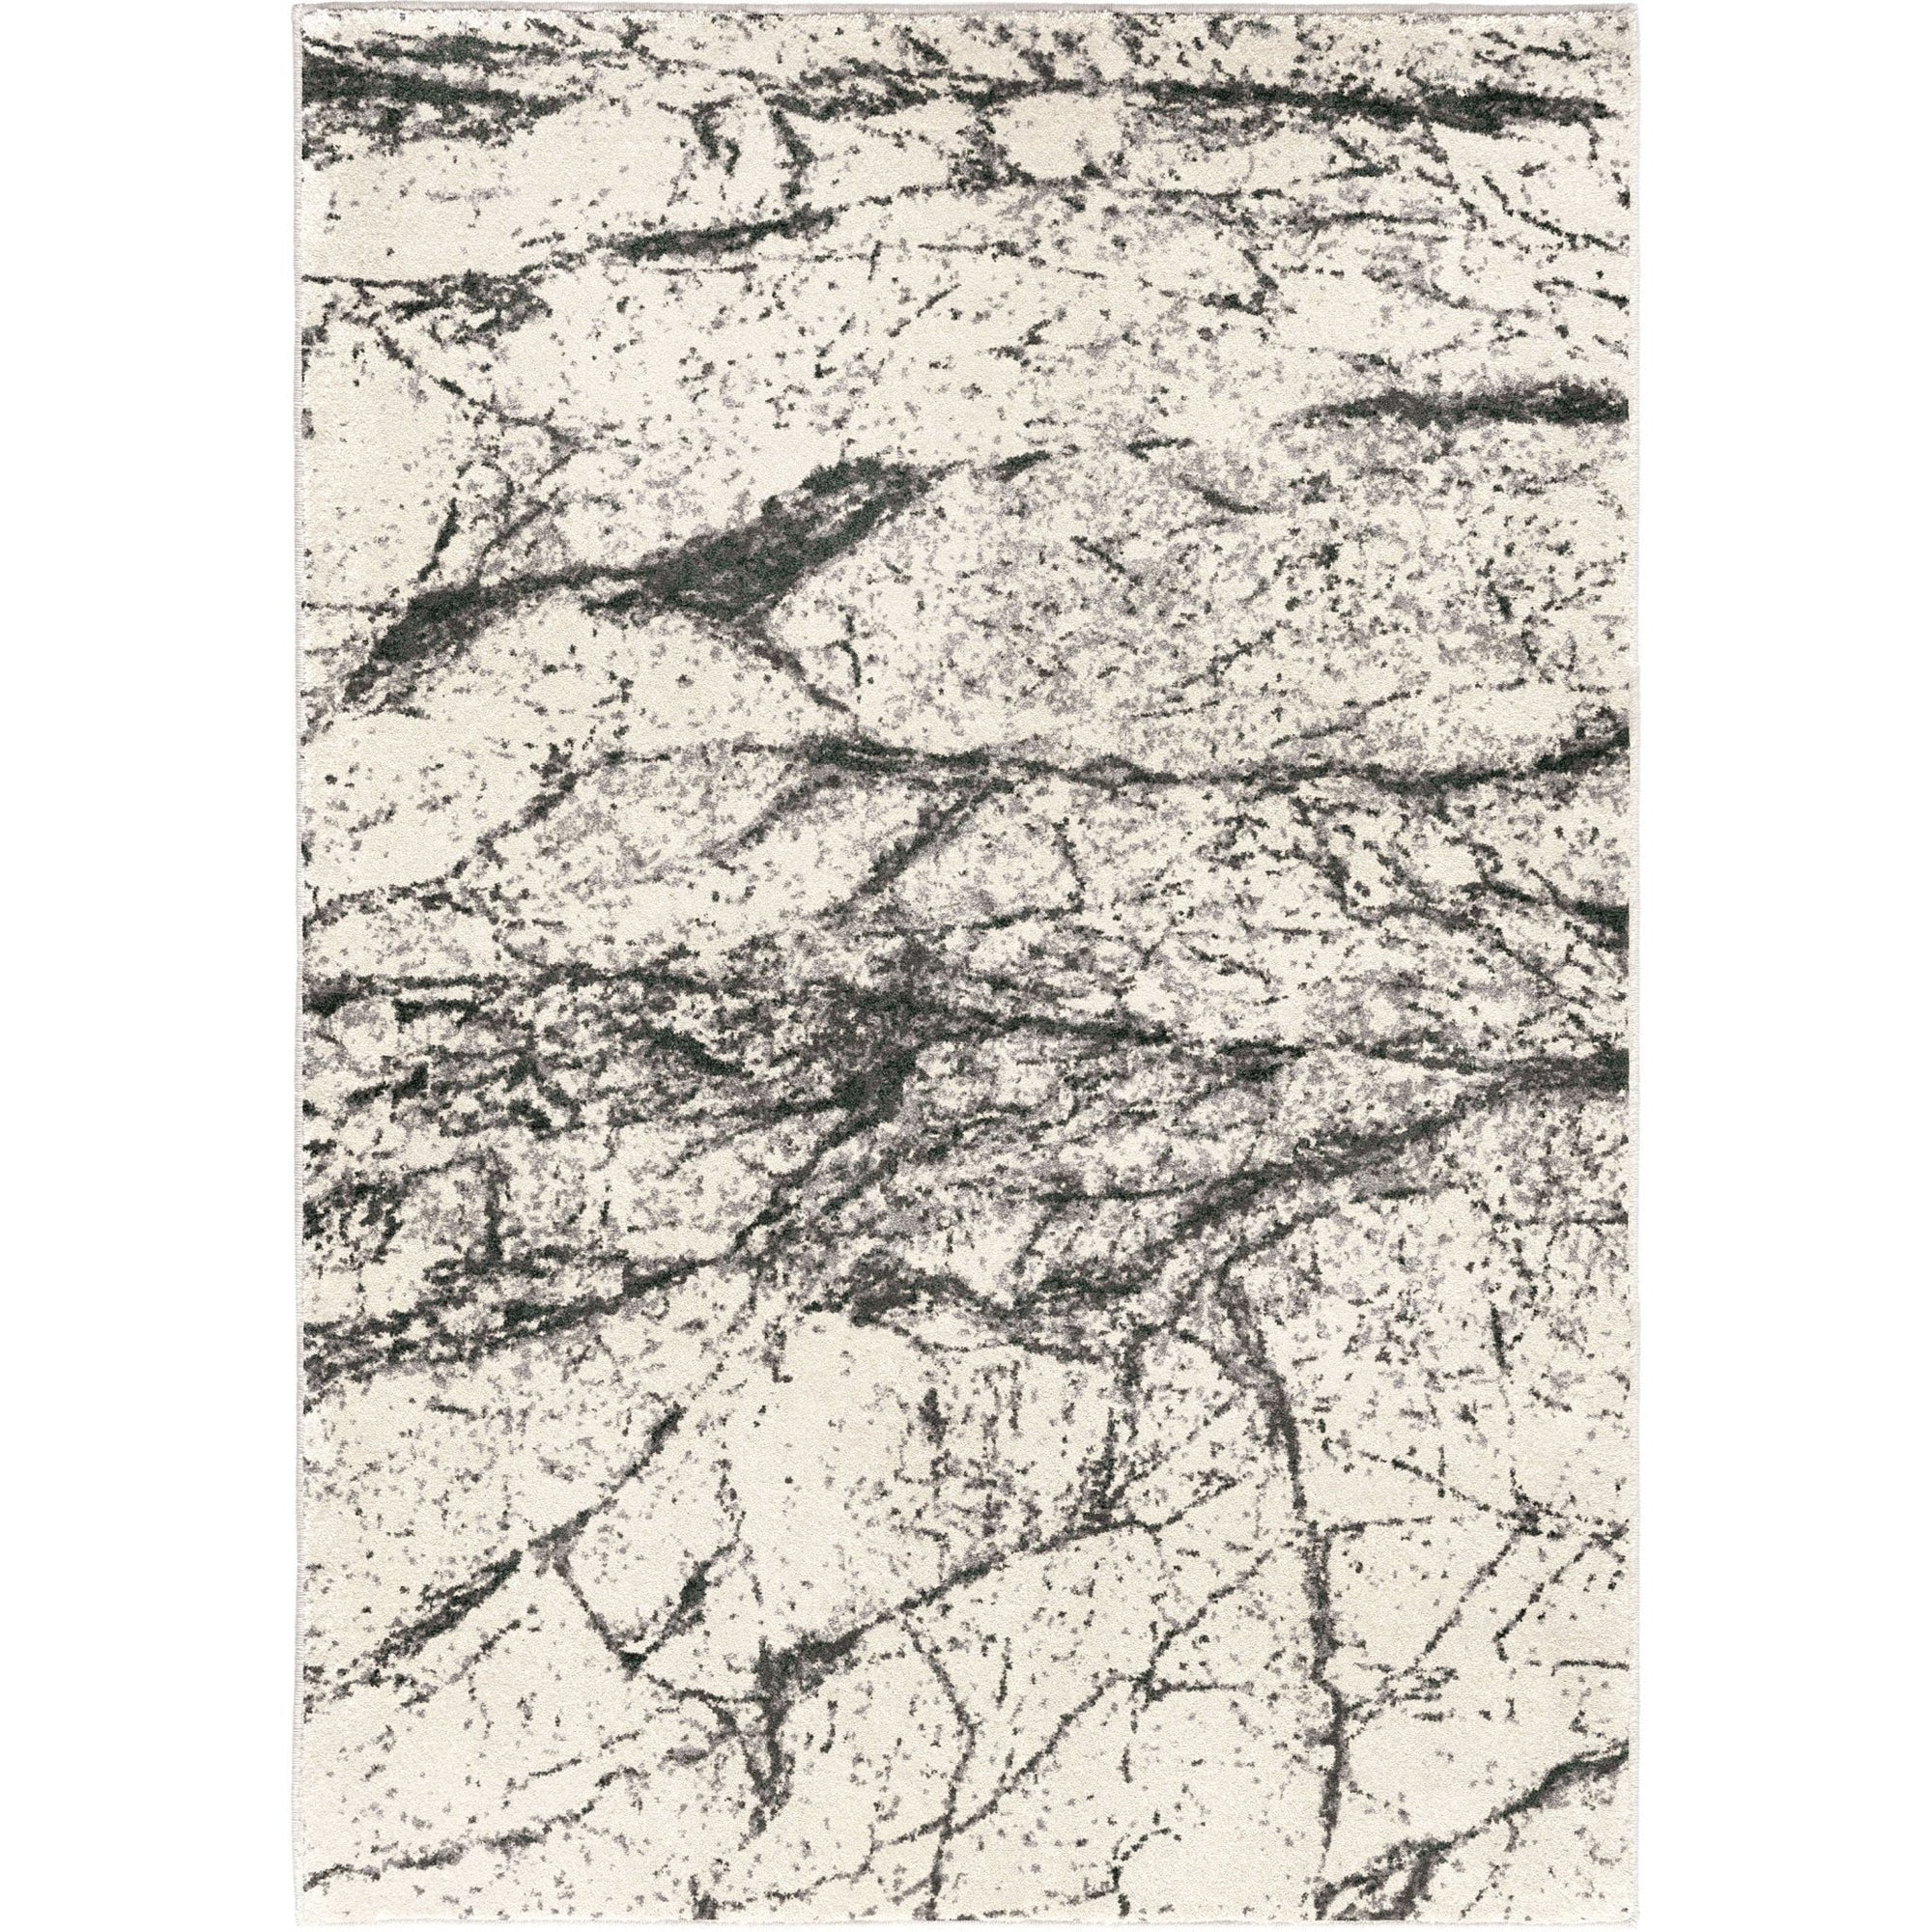 Riverstone 9014 Marble Hill Natural Rug - Rug & Home